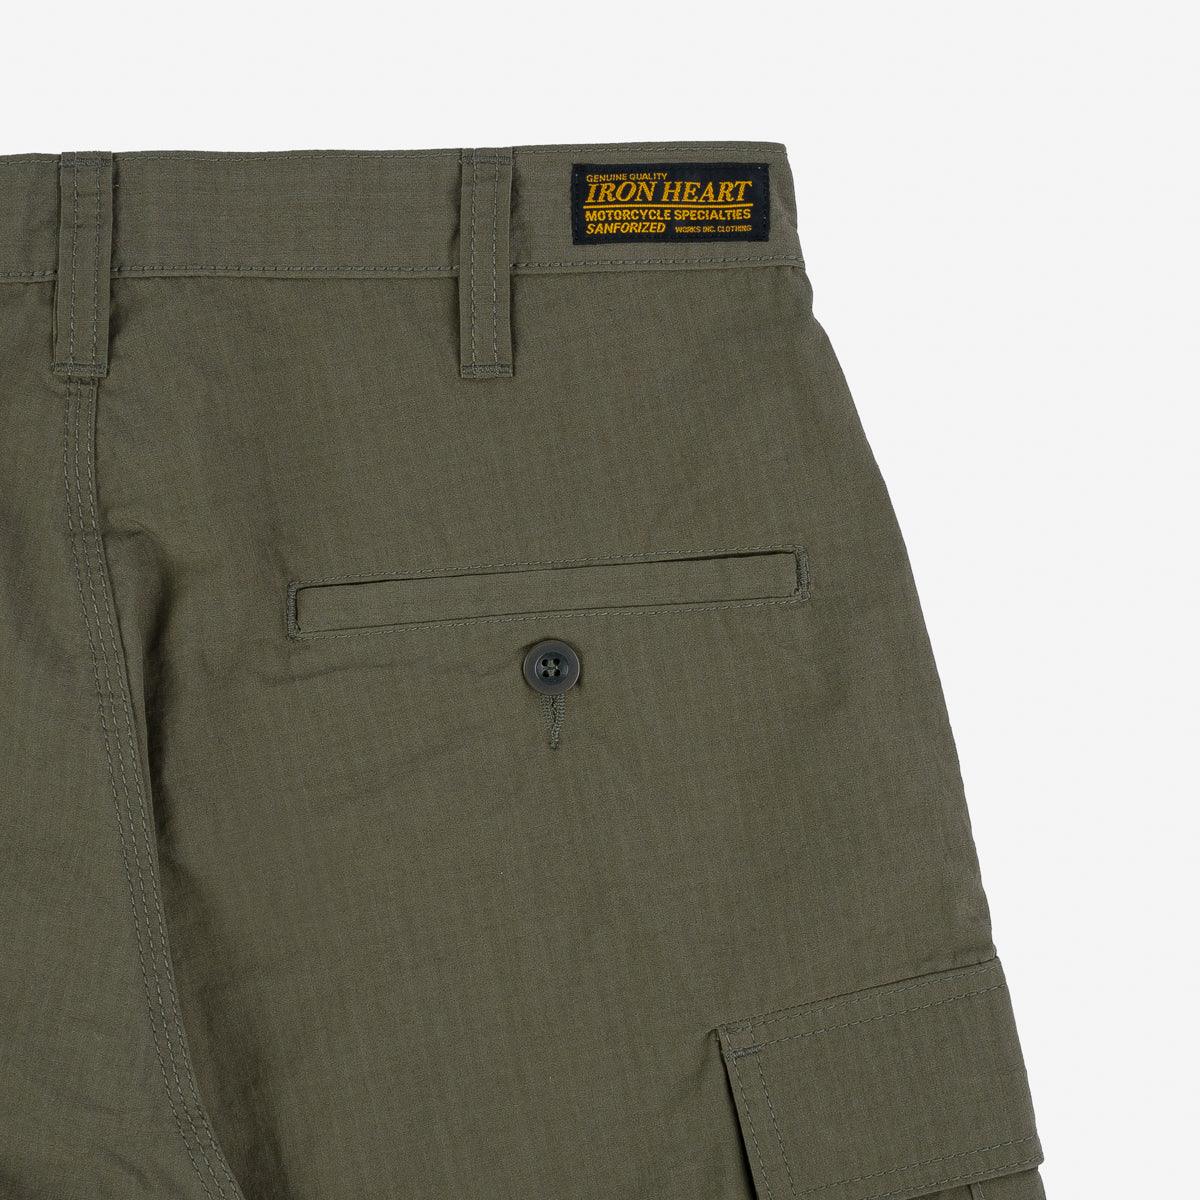 Image showing the IH-736-ODG - Ripstop Cargo Shorts - Olive Drab Green which is a Trousers described by the following info SS24 and sold on the IRON HEART GERMANY online store